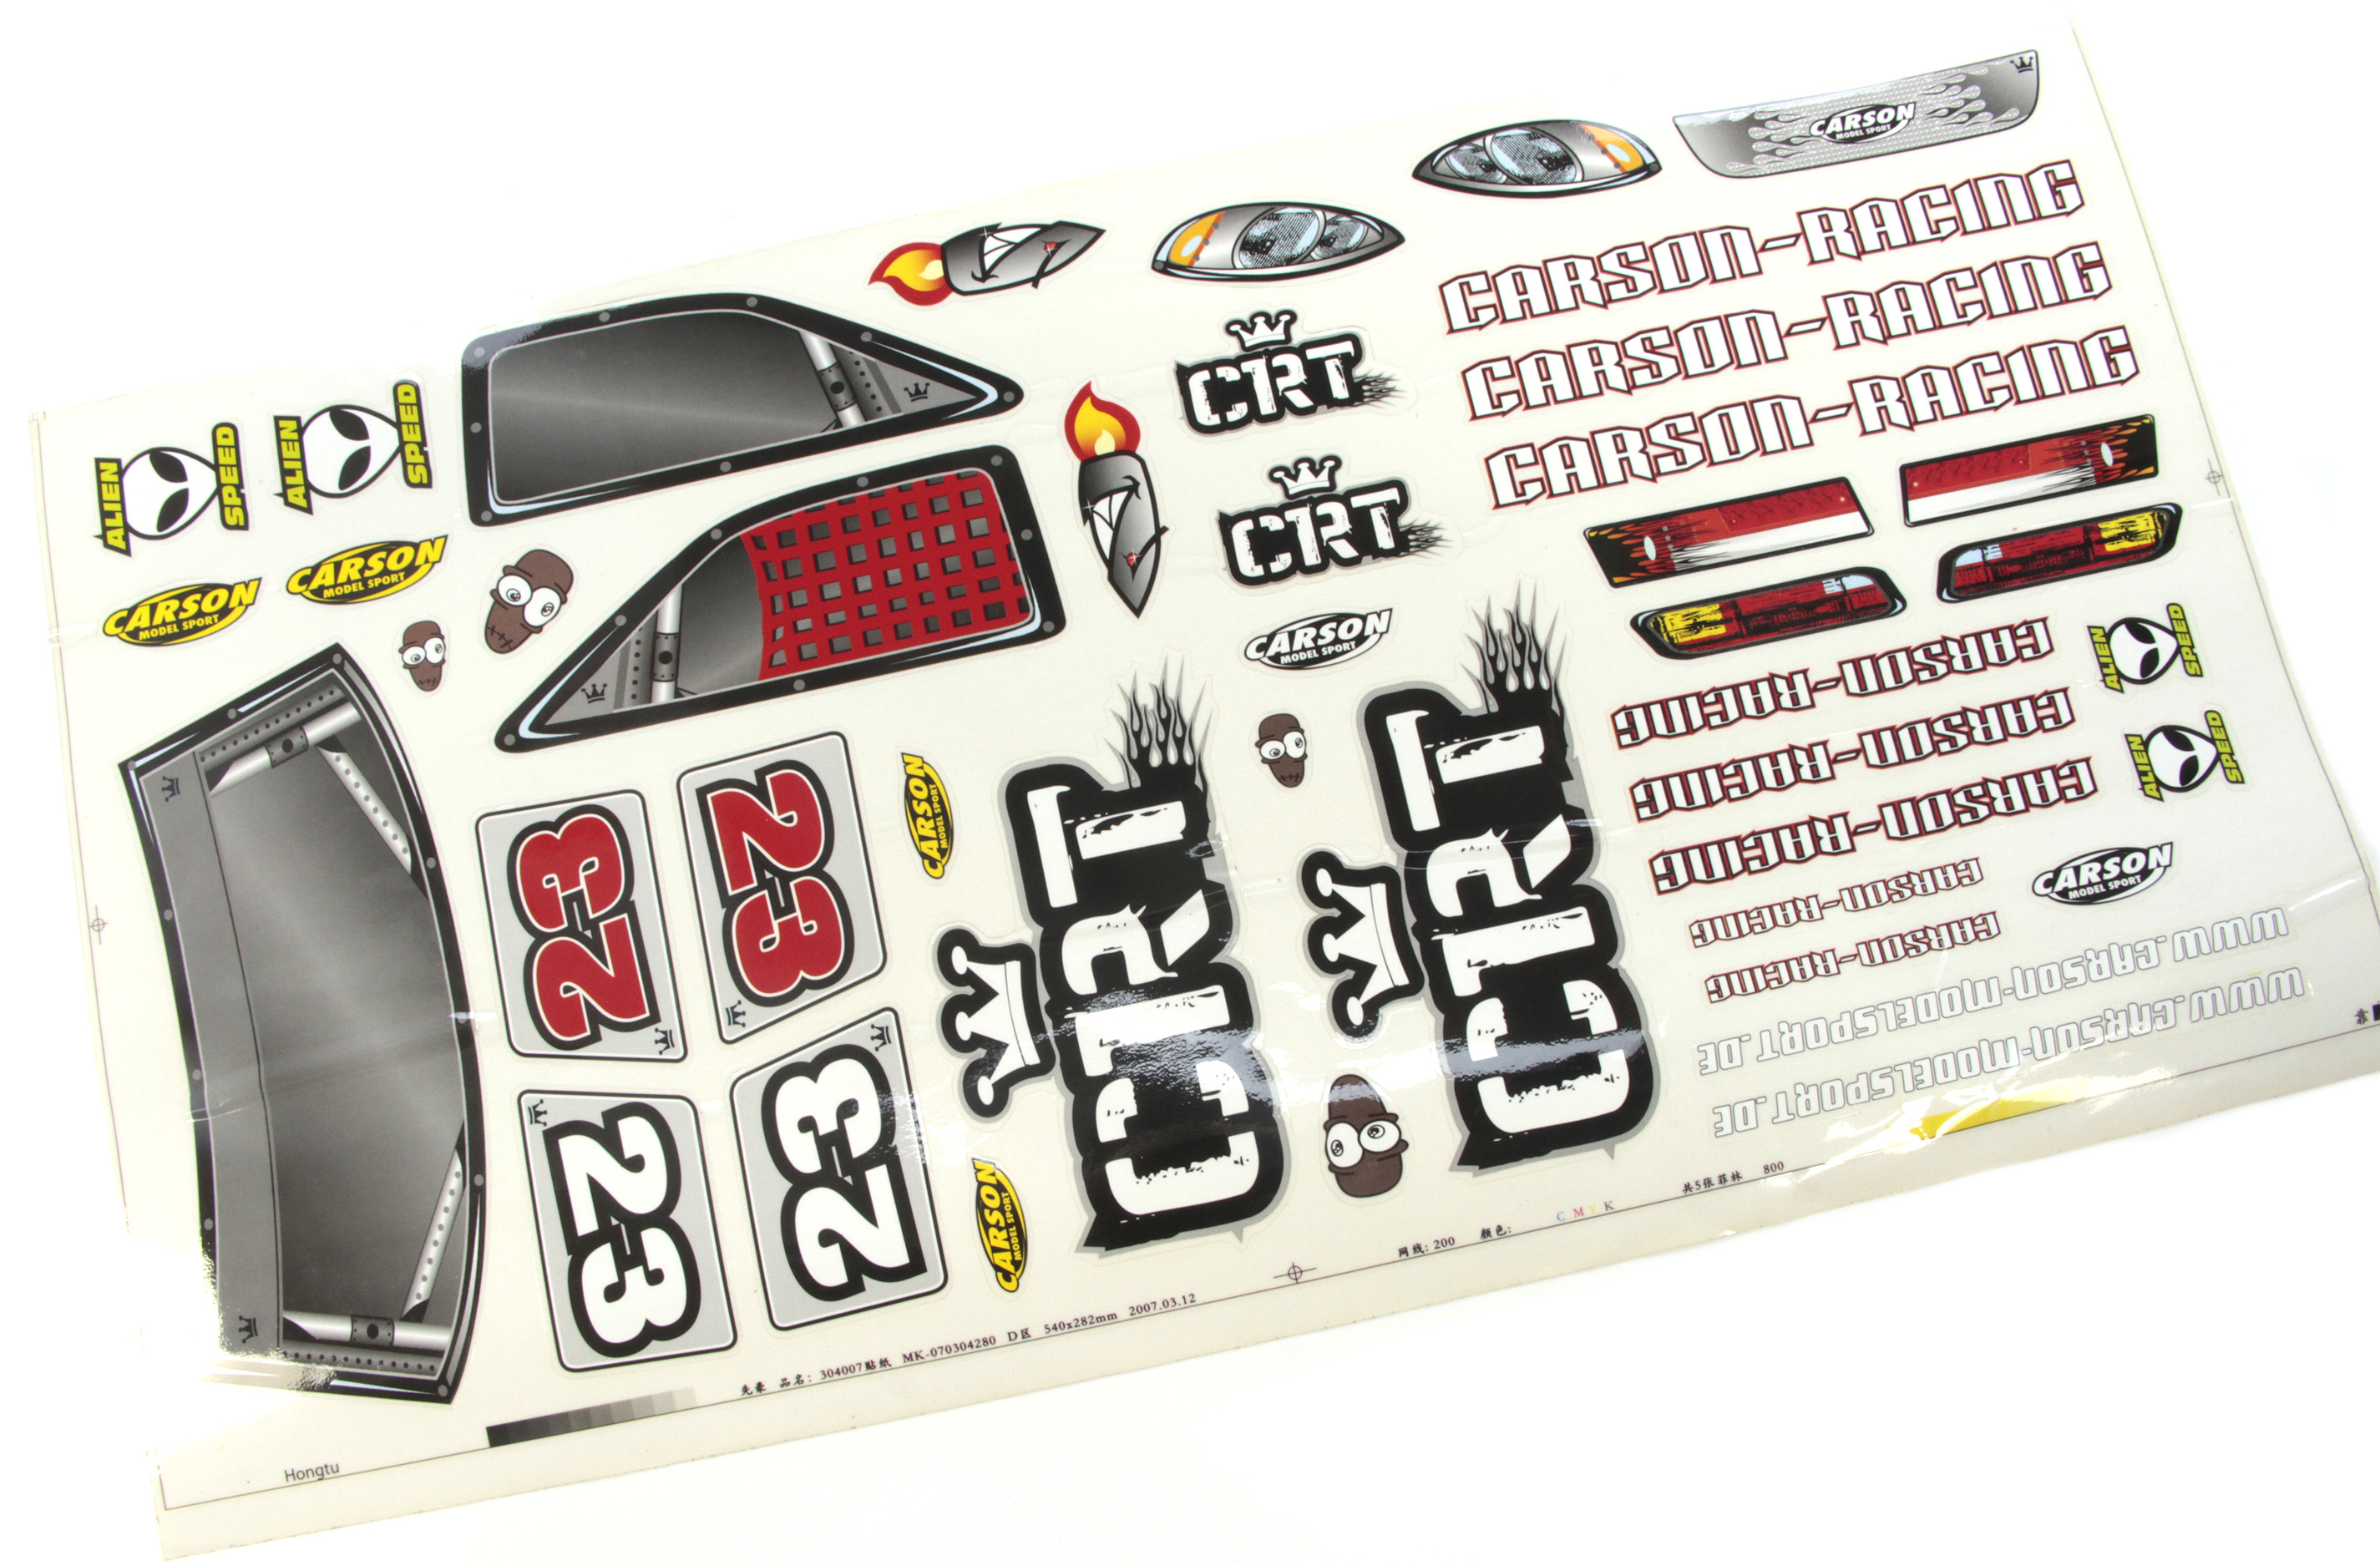 305033 Vehicle decal set for CRT